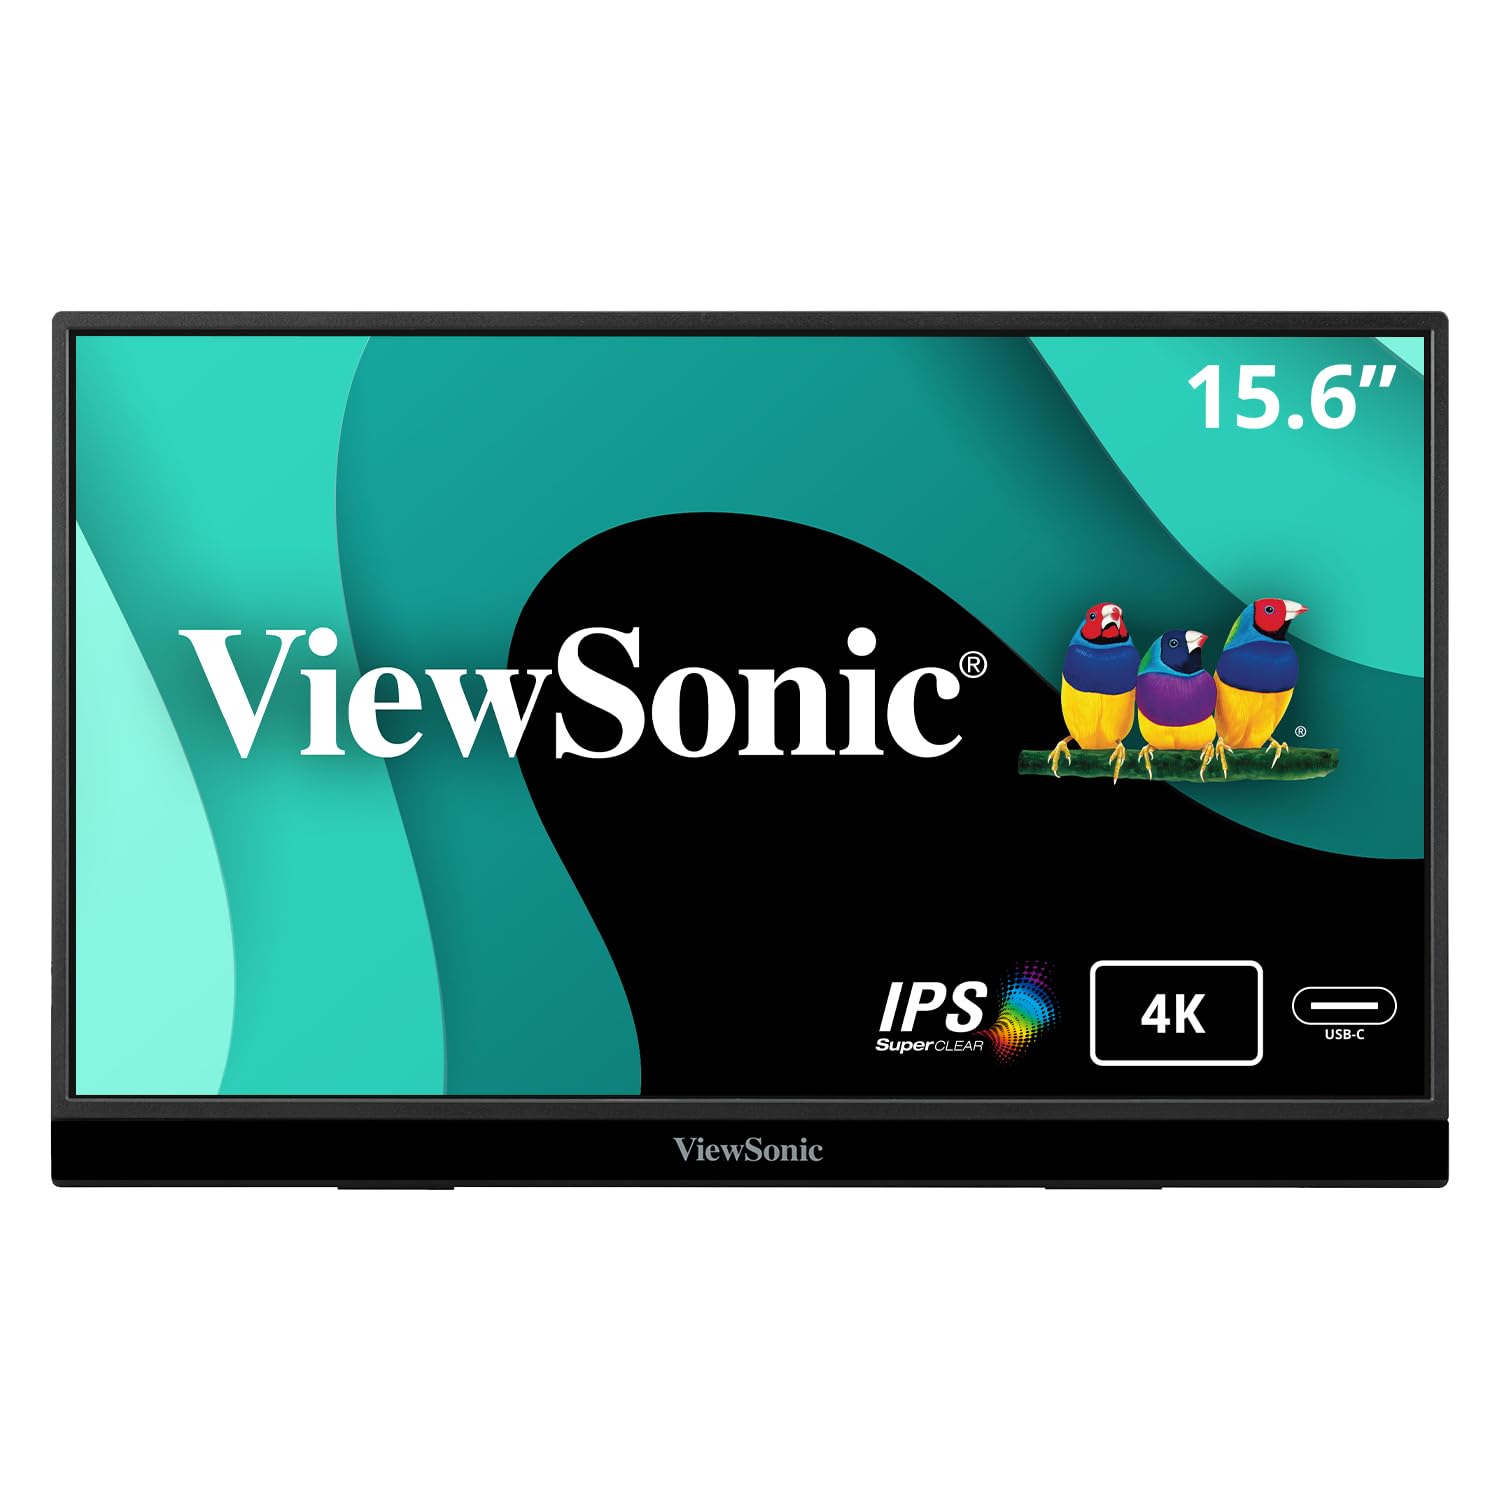 ViewSonic VX1655-4K 15.6 Inch 4K UHD Portable LED IPS Monitor with 2 Way Powered 60W USB C, Mini HDMI, Dual Speakers, and Built-in Stand with Tripod Mount